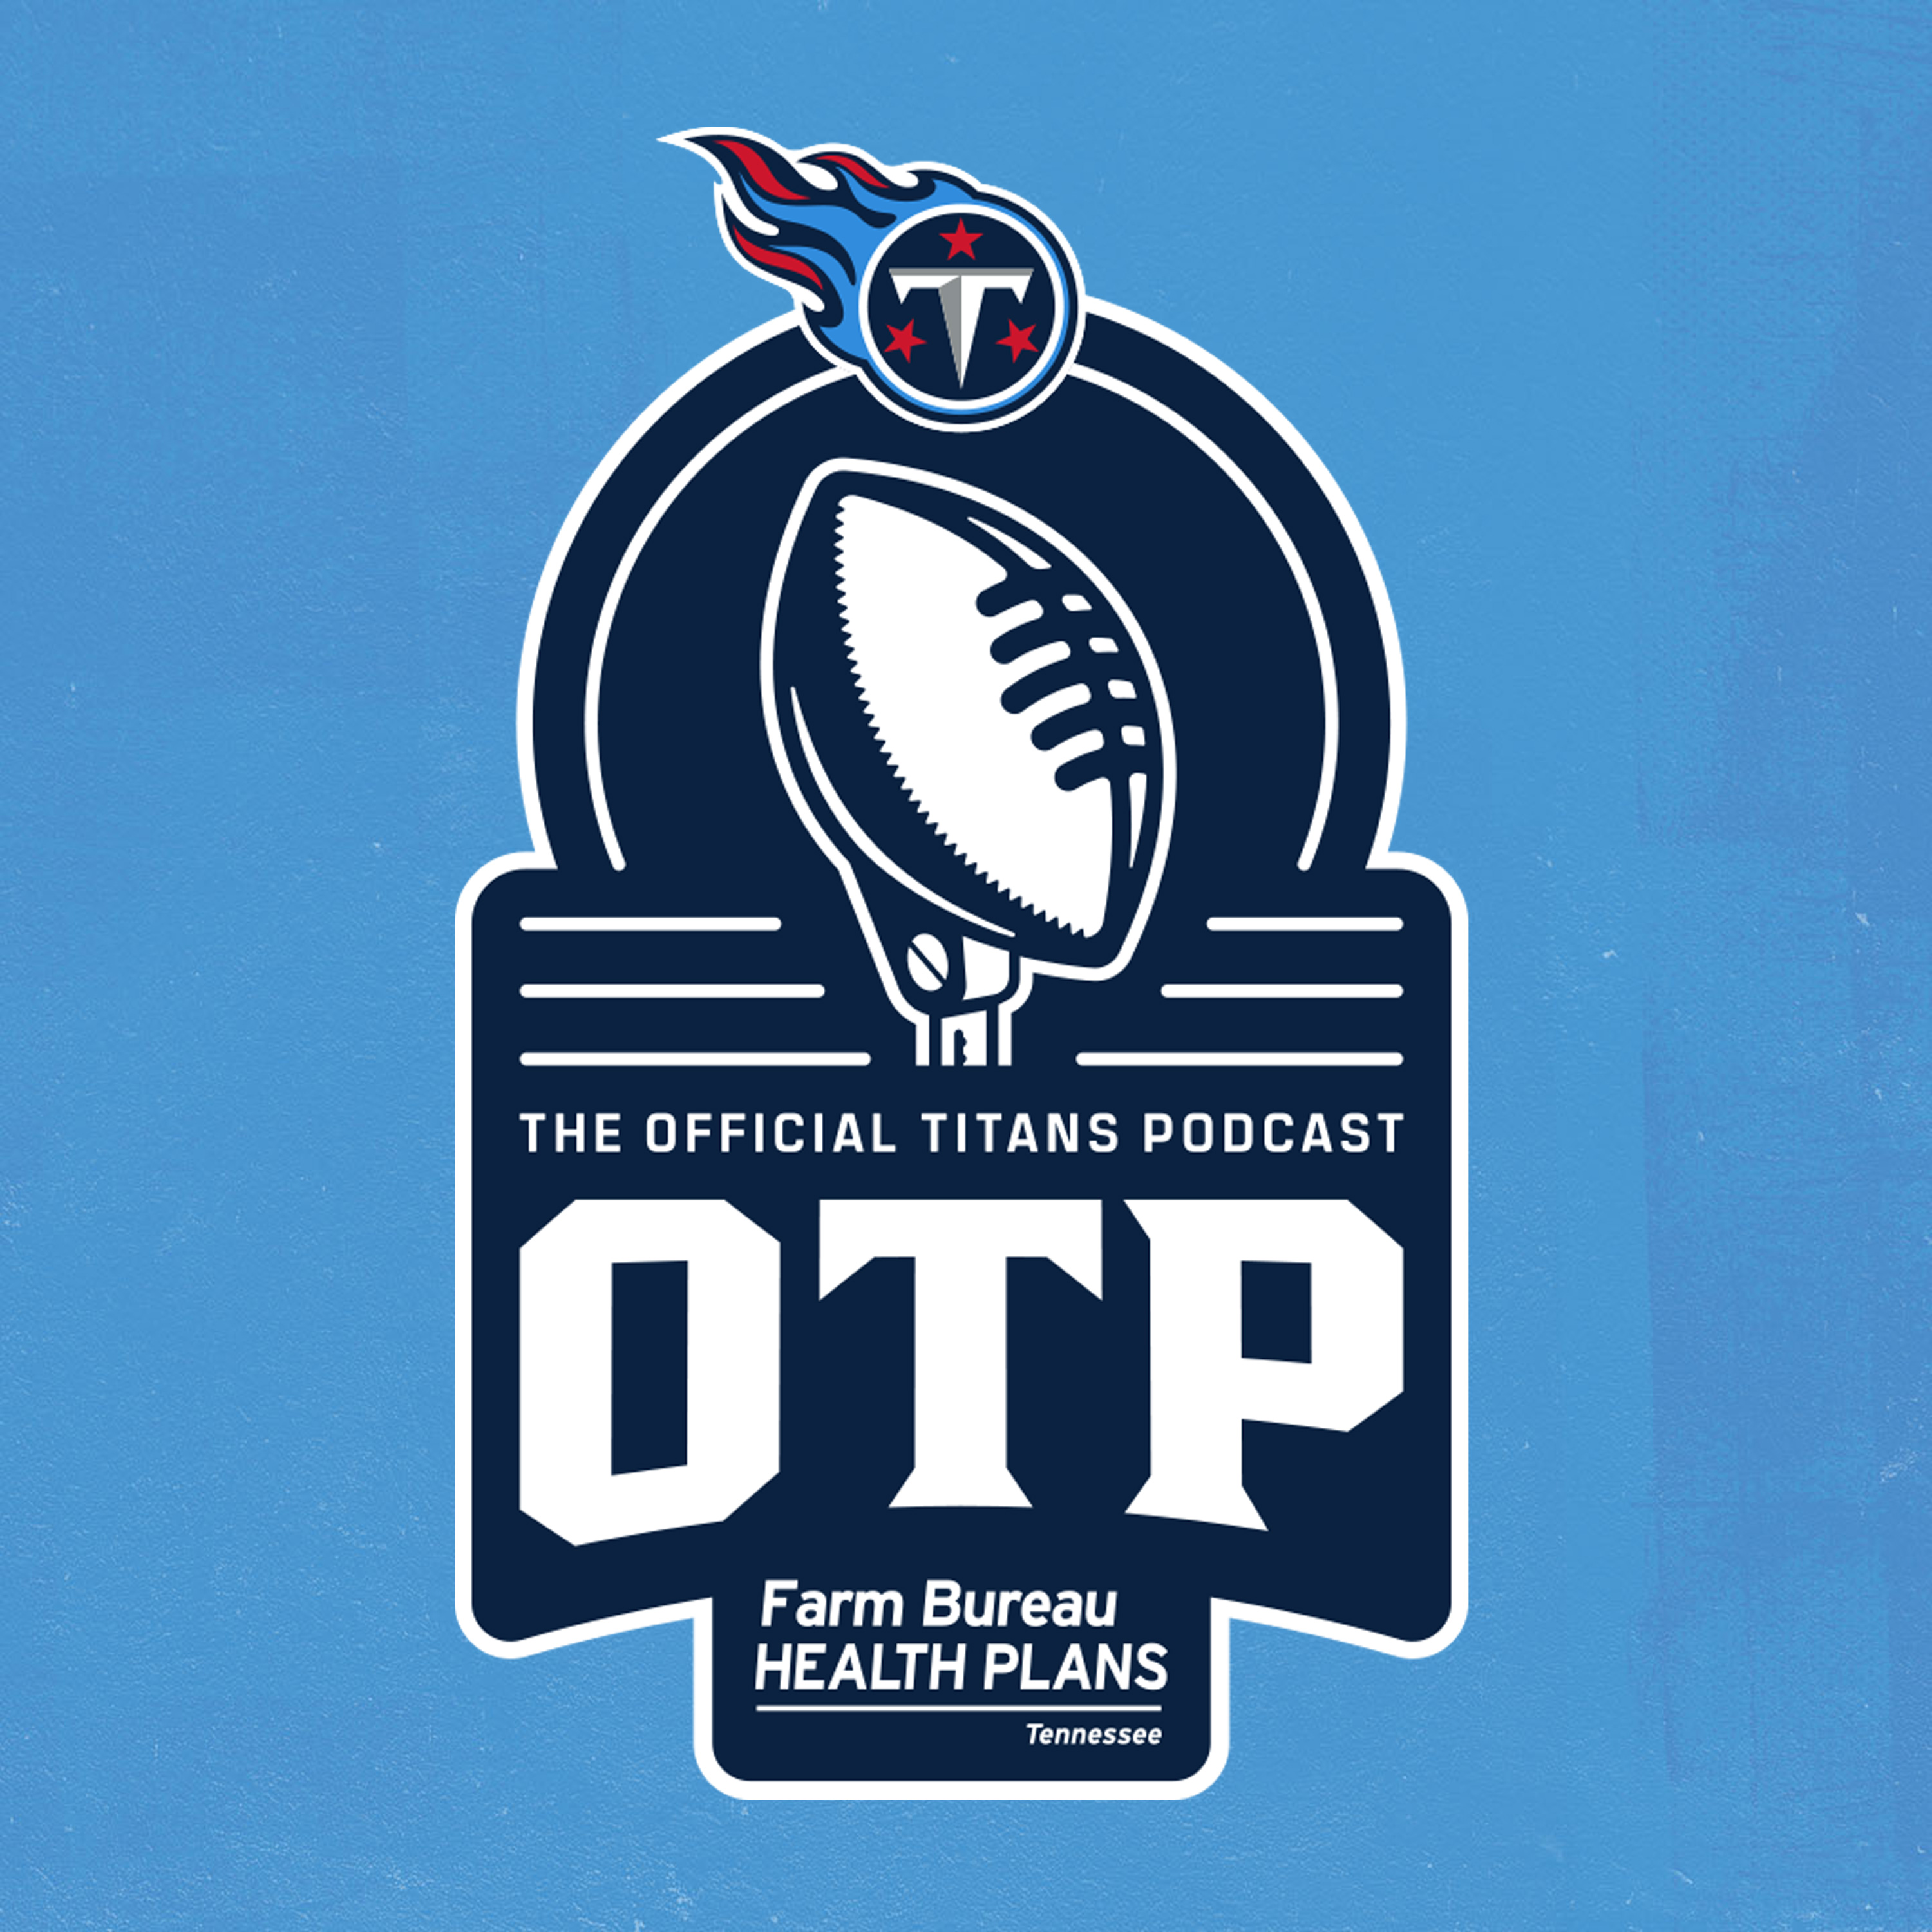 The OTP | Breakdown of the Titans 2024 Schedule